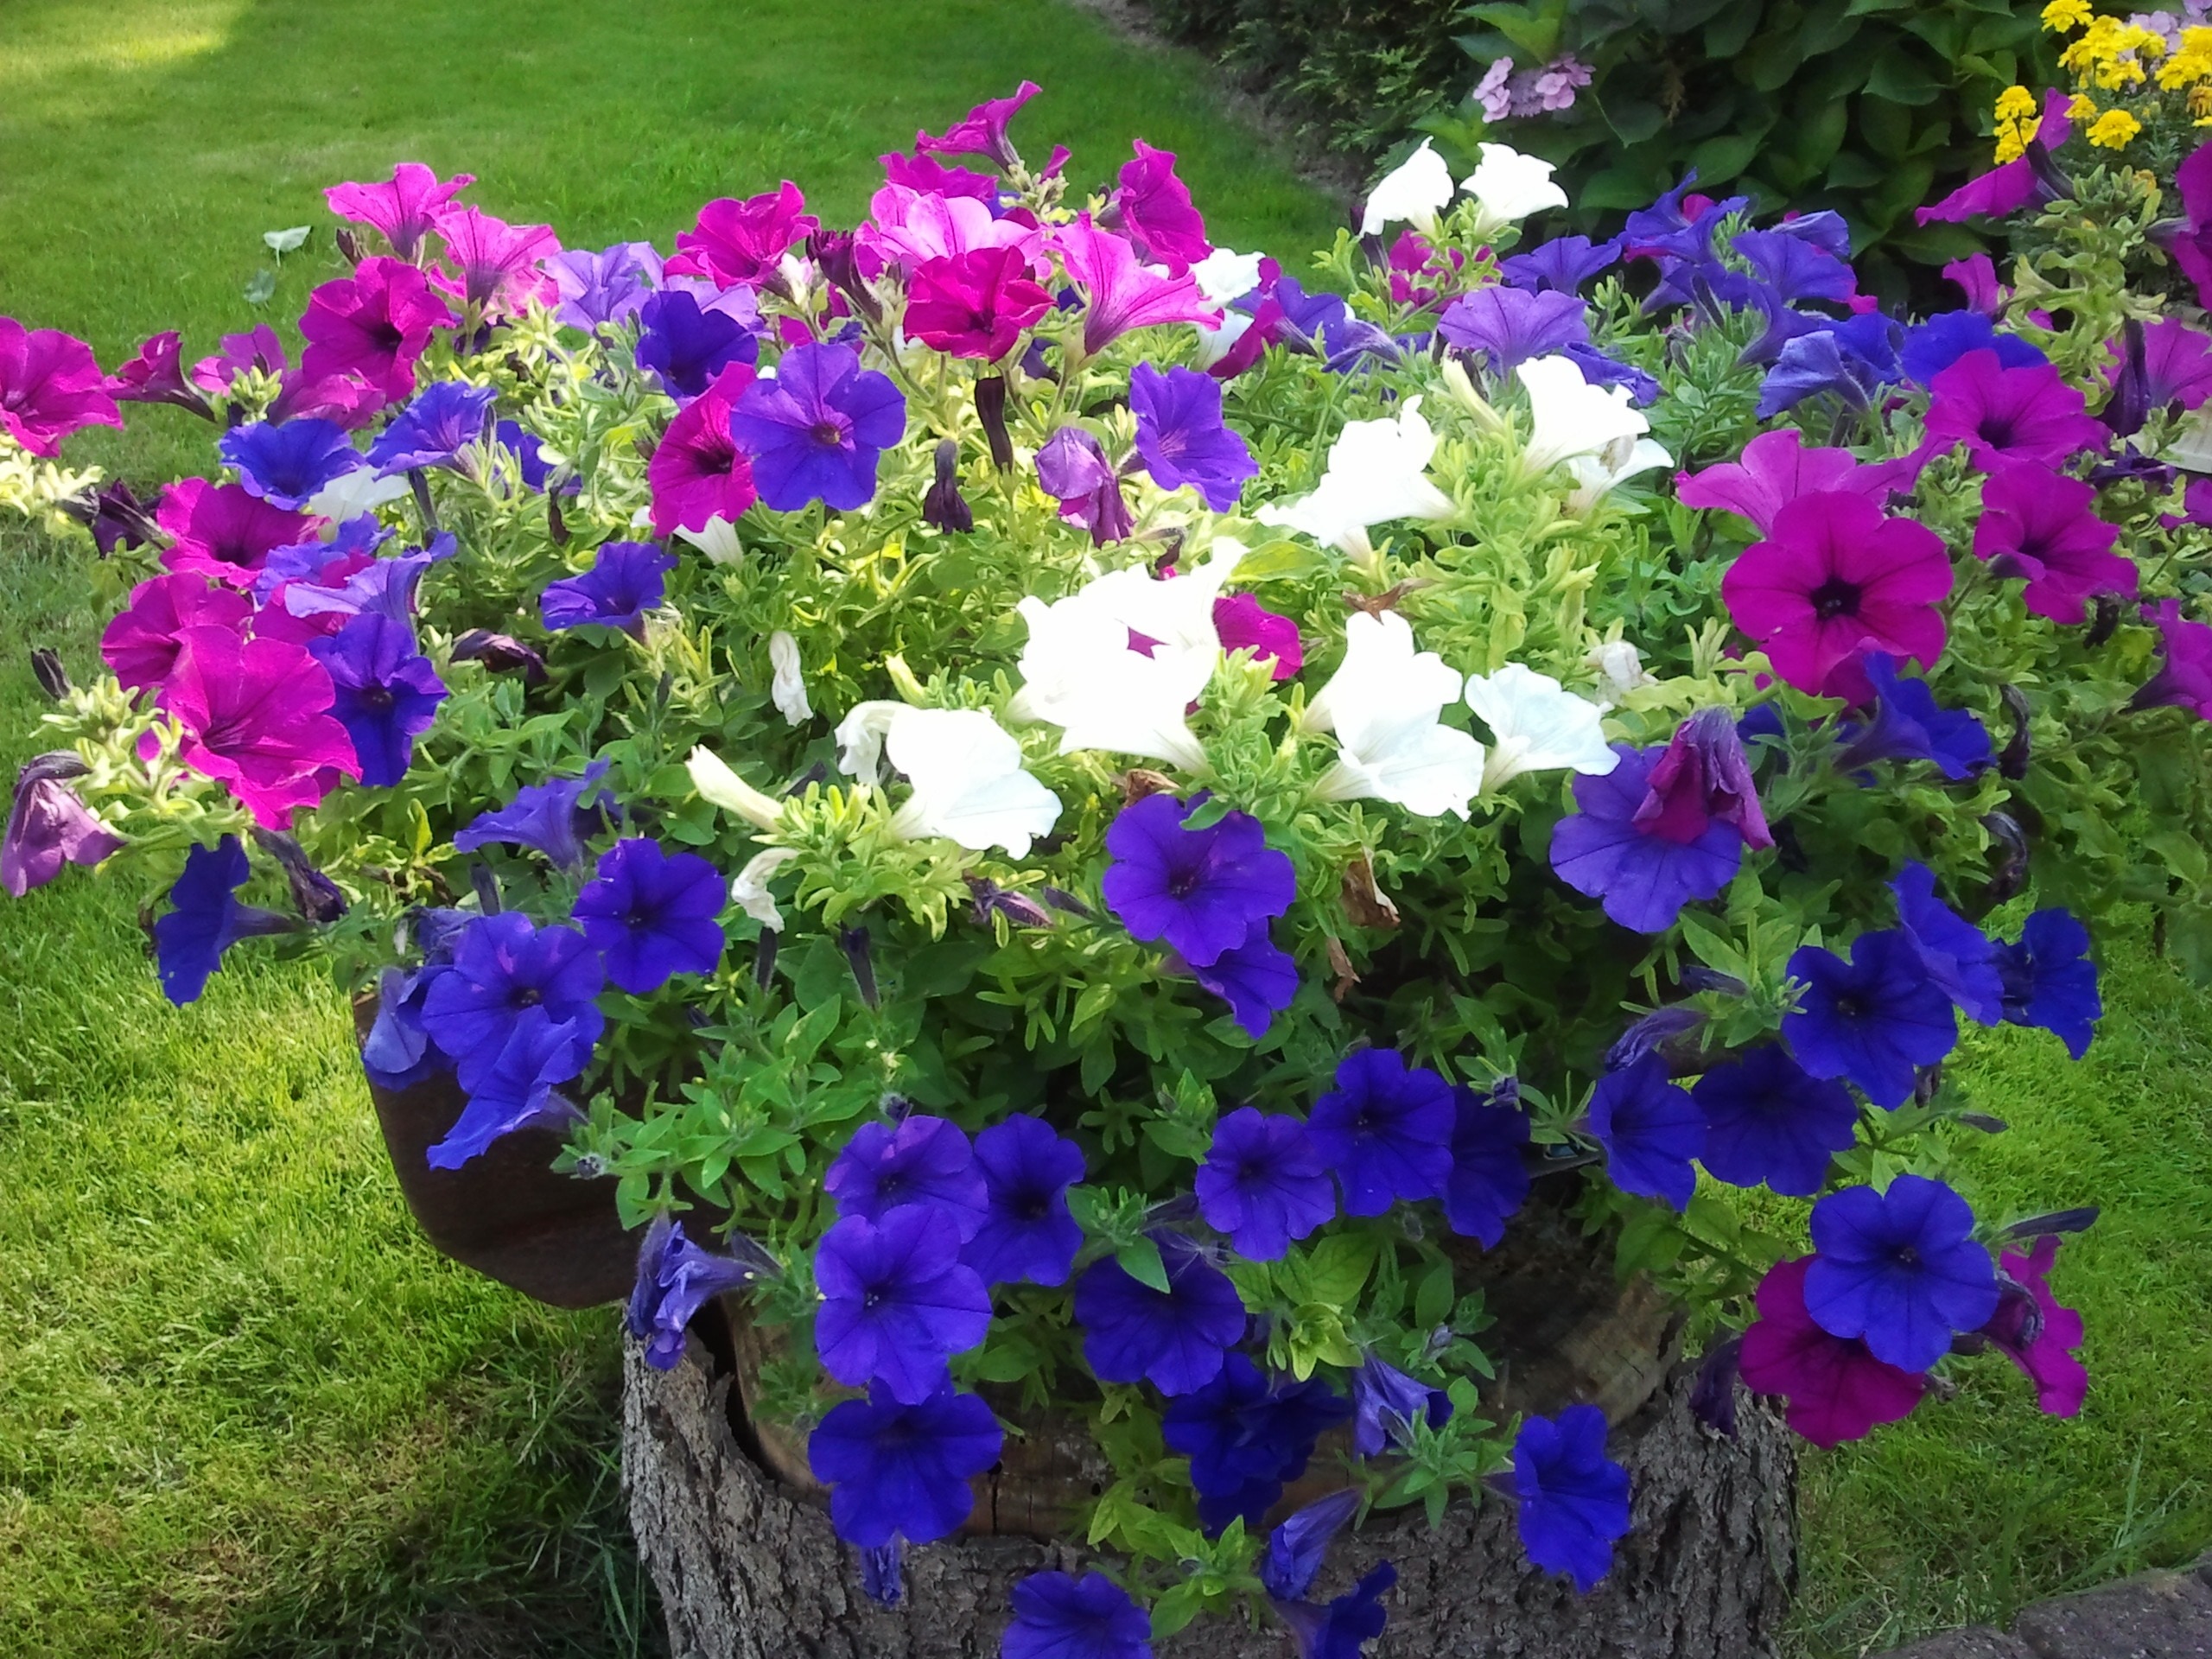 purple, pink, white and blue flowers on tree log